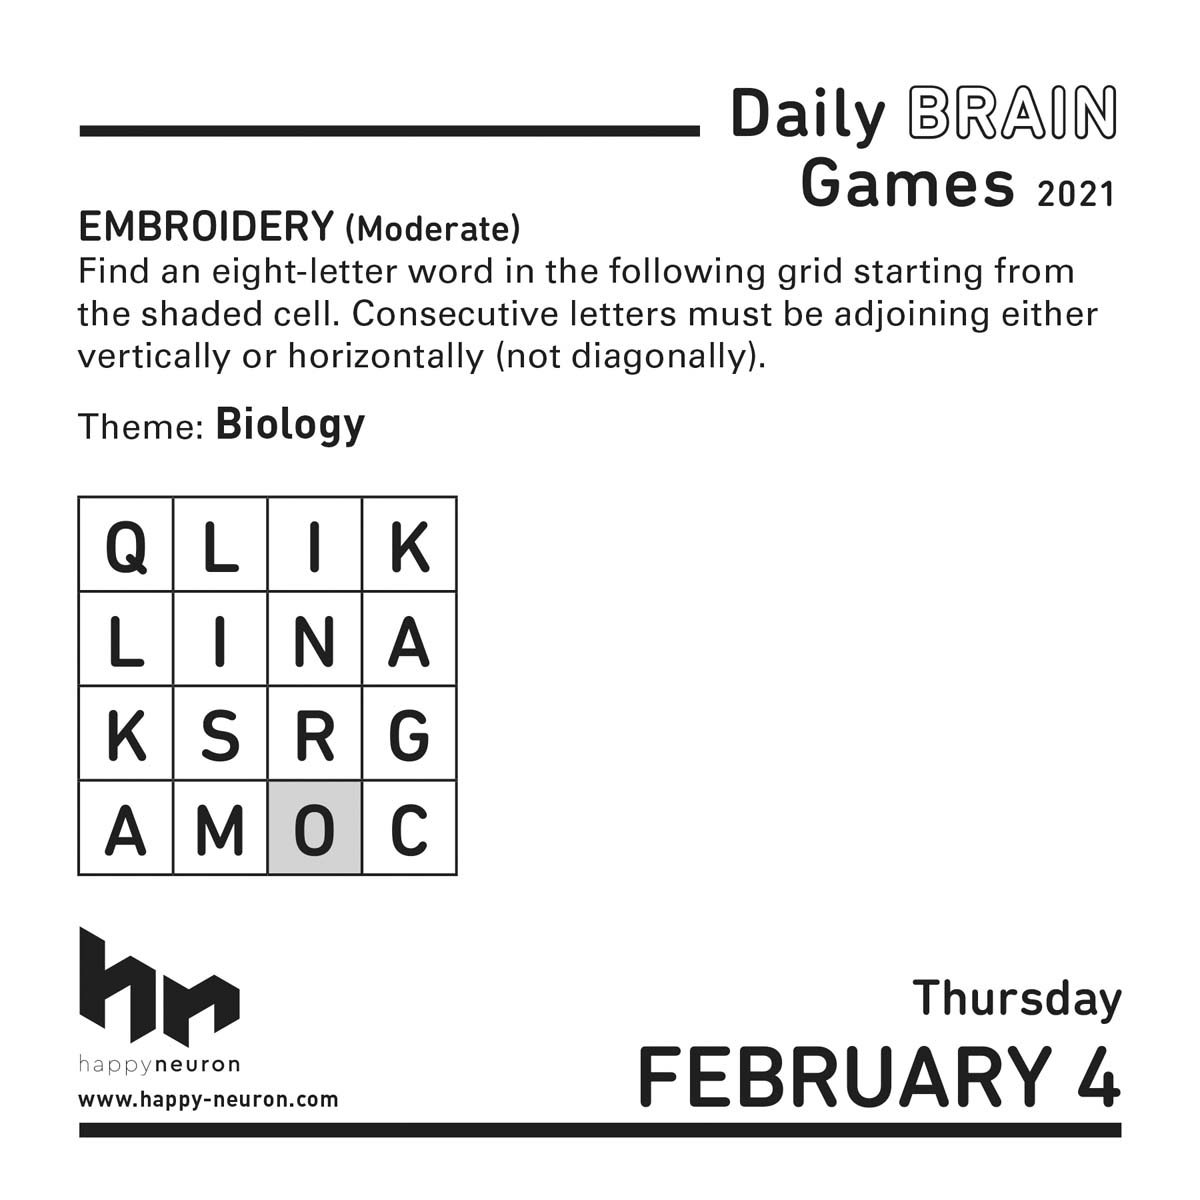 the-daily-brain-games-2014-day-to-day-calendar-by-happyneuron-offers-entertaining-brain-games